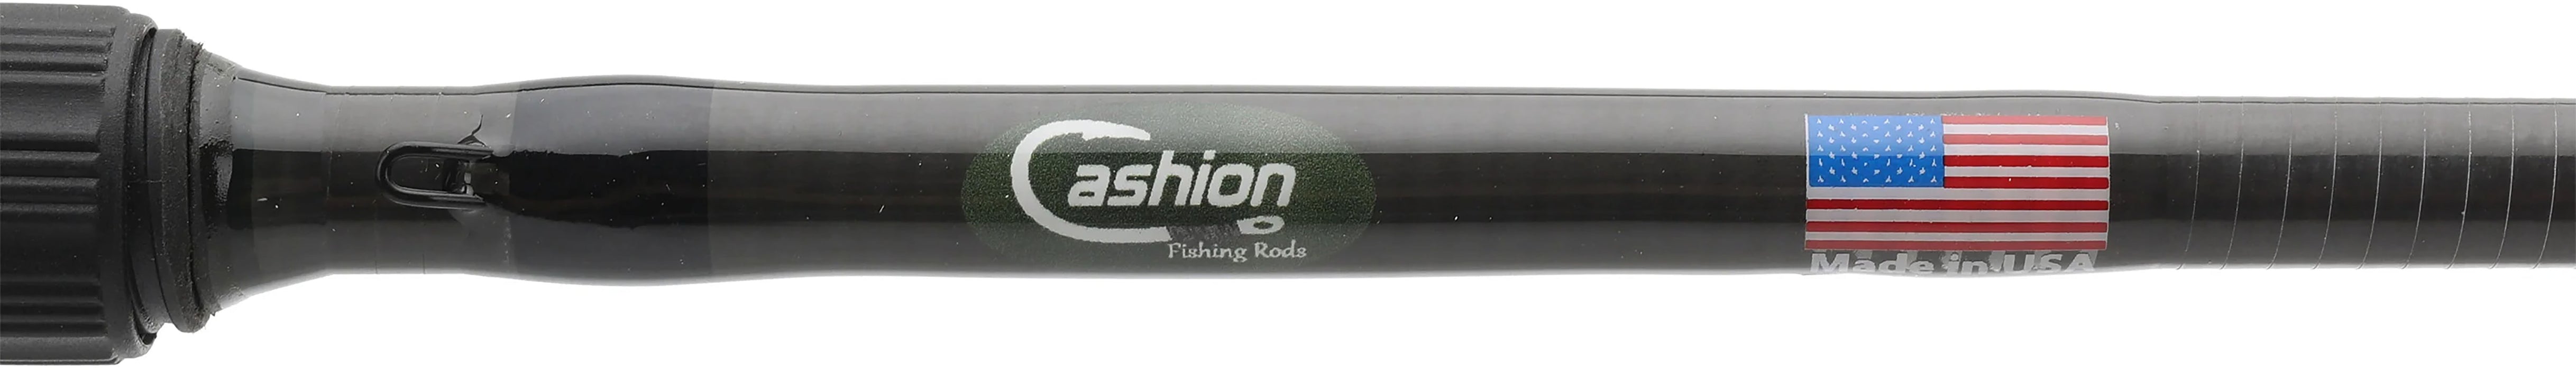 Cashion ICON Series Chatterbait Casting Rod